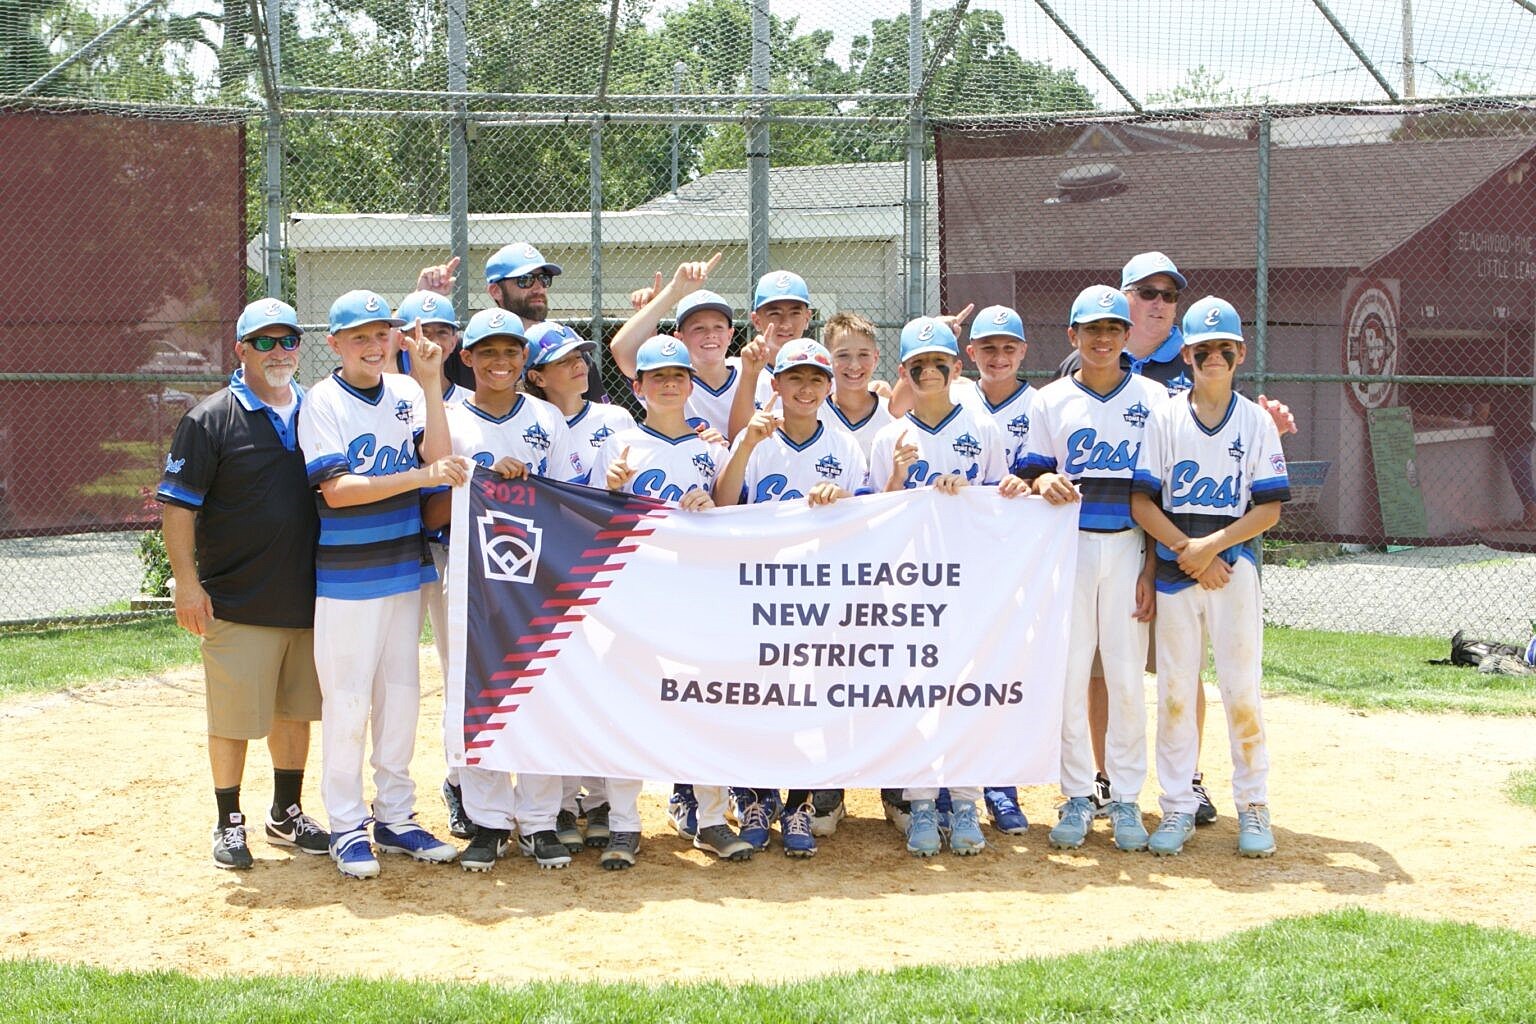 Championship Little League Teams Honored By Toms River - Jersey Shore Online